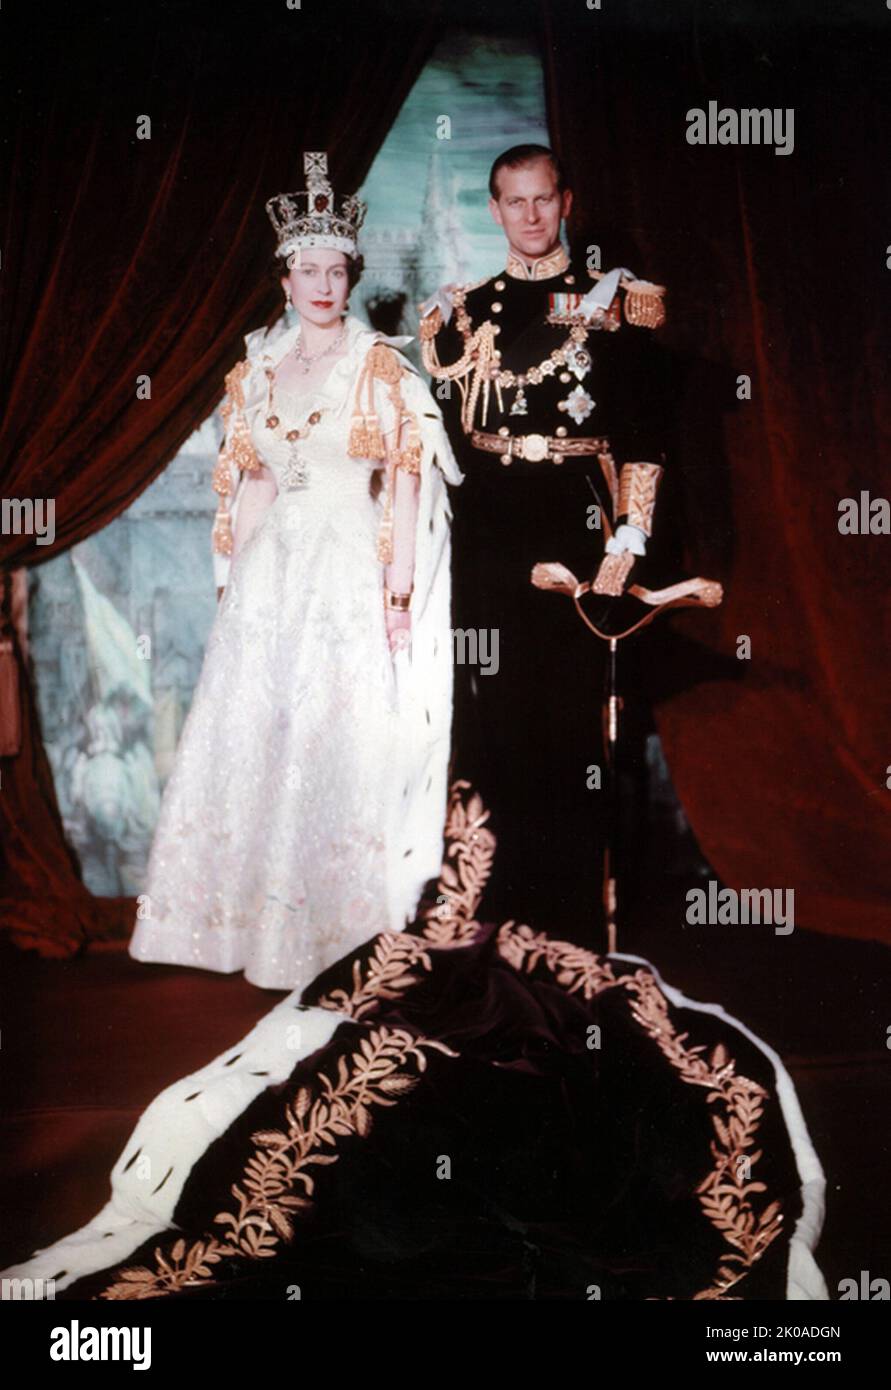 Queen elizabeth ii coronation hi-res stock photography and images - Alamy